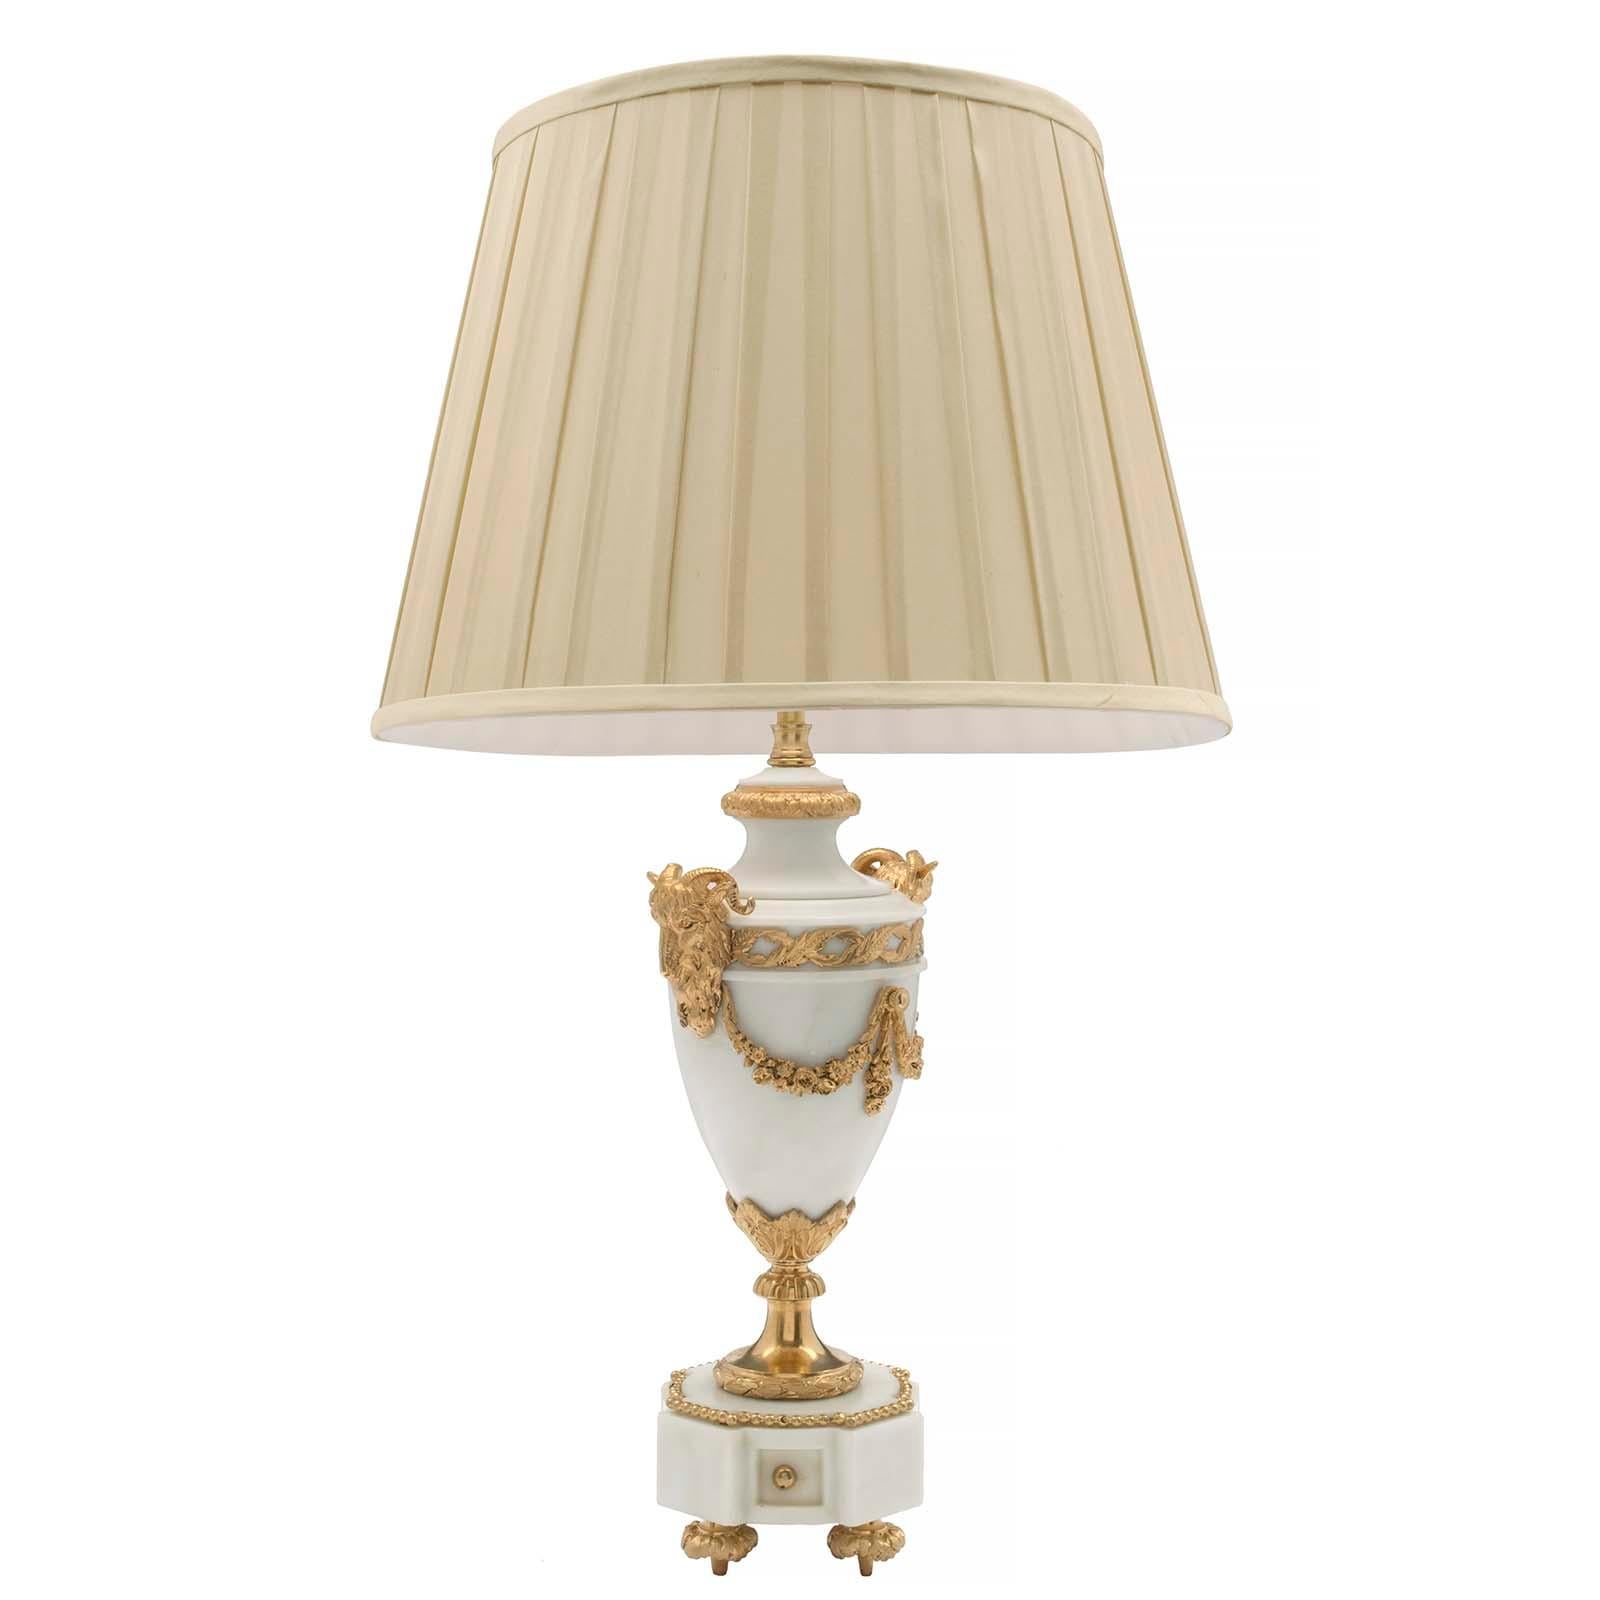 An extremely elegant French 19th century Louis XVI st. white Carrara marble and ormolu lamp. The lamp is raised by ormolu foliate designed topie feet. The octagonal white Carrara marble base has recessed sides accented with ormolu cabochons and a